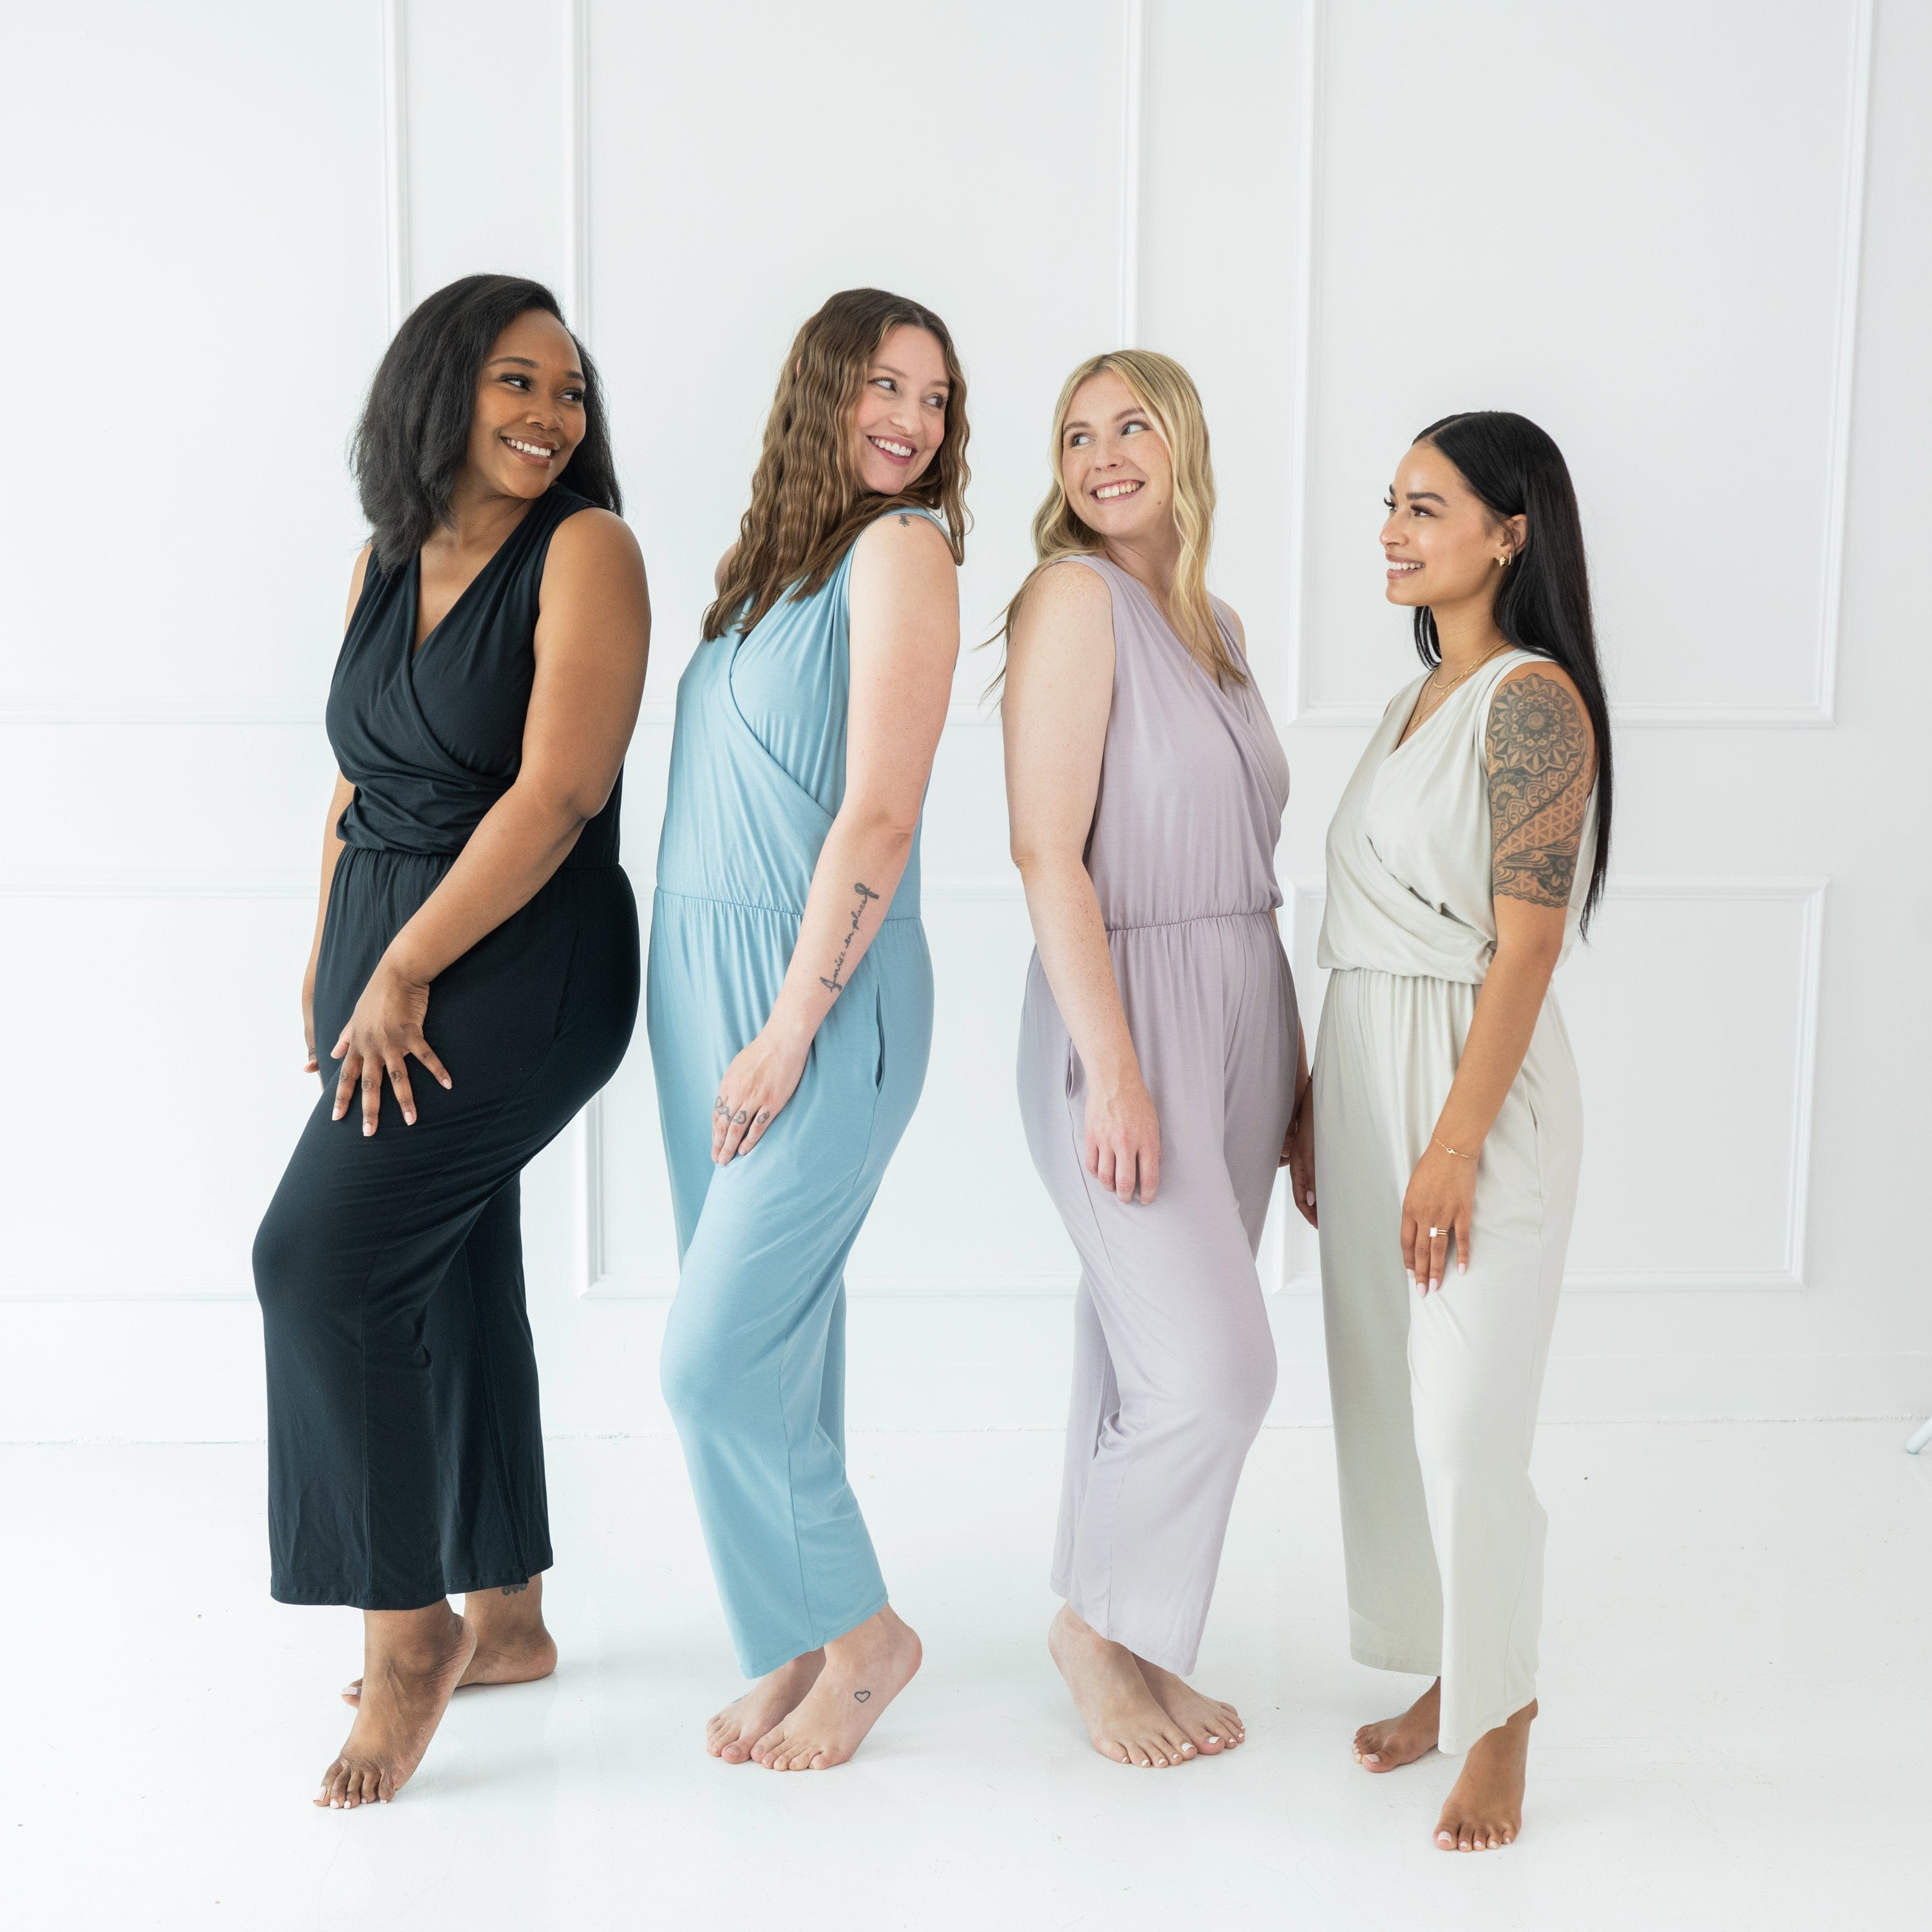 Women wearing Kyte Baby Women's sleeveless jumpsuits with pockets